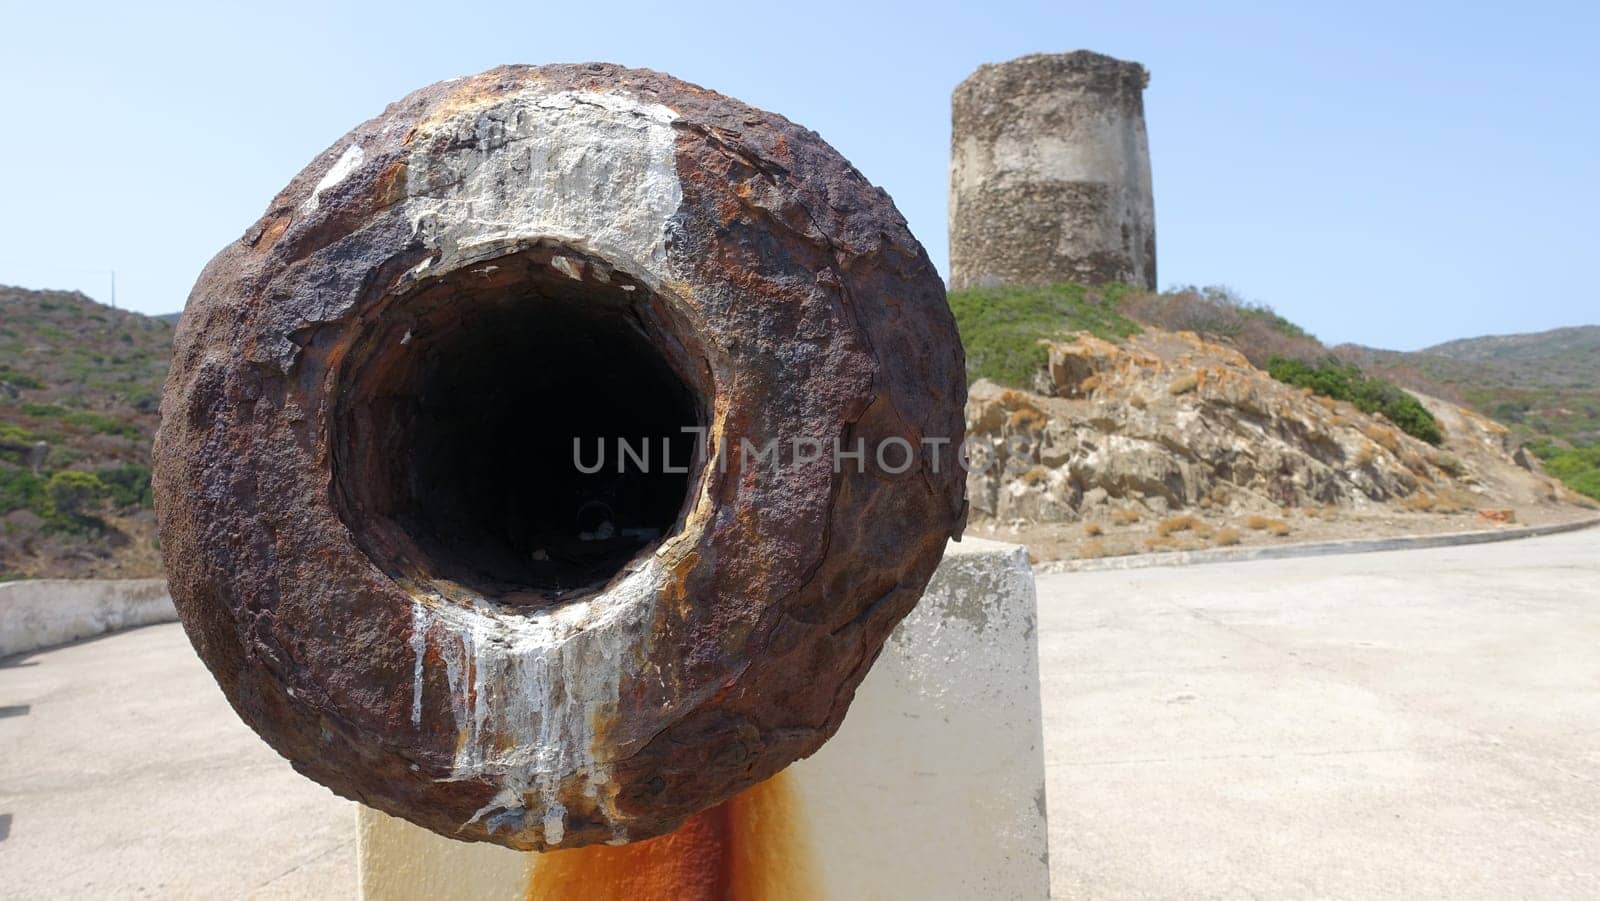 The mouth of an ancient cannon on one of the seaside lookouts of Asinara in Sardinia, Italy. During a summer day.